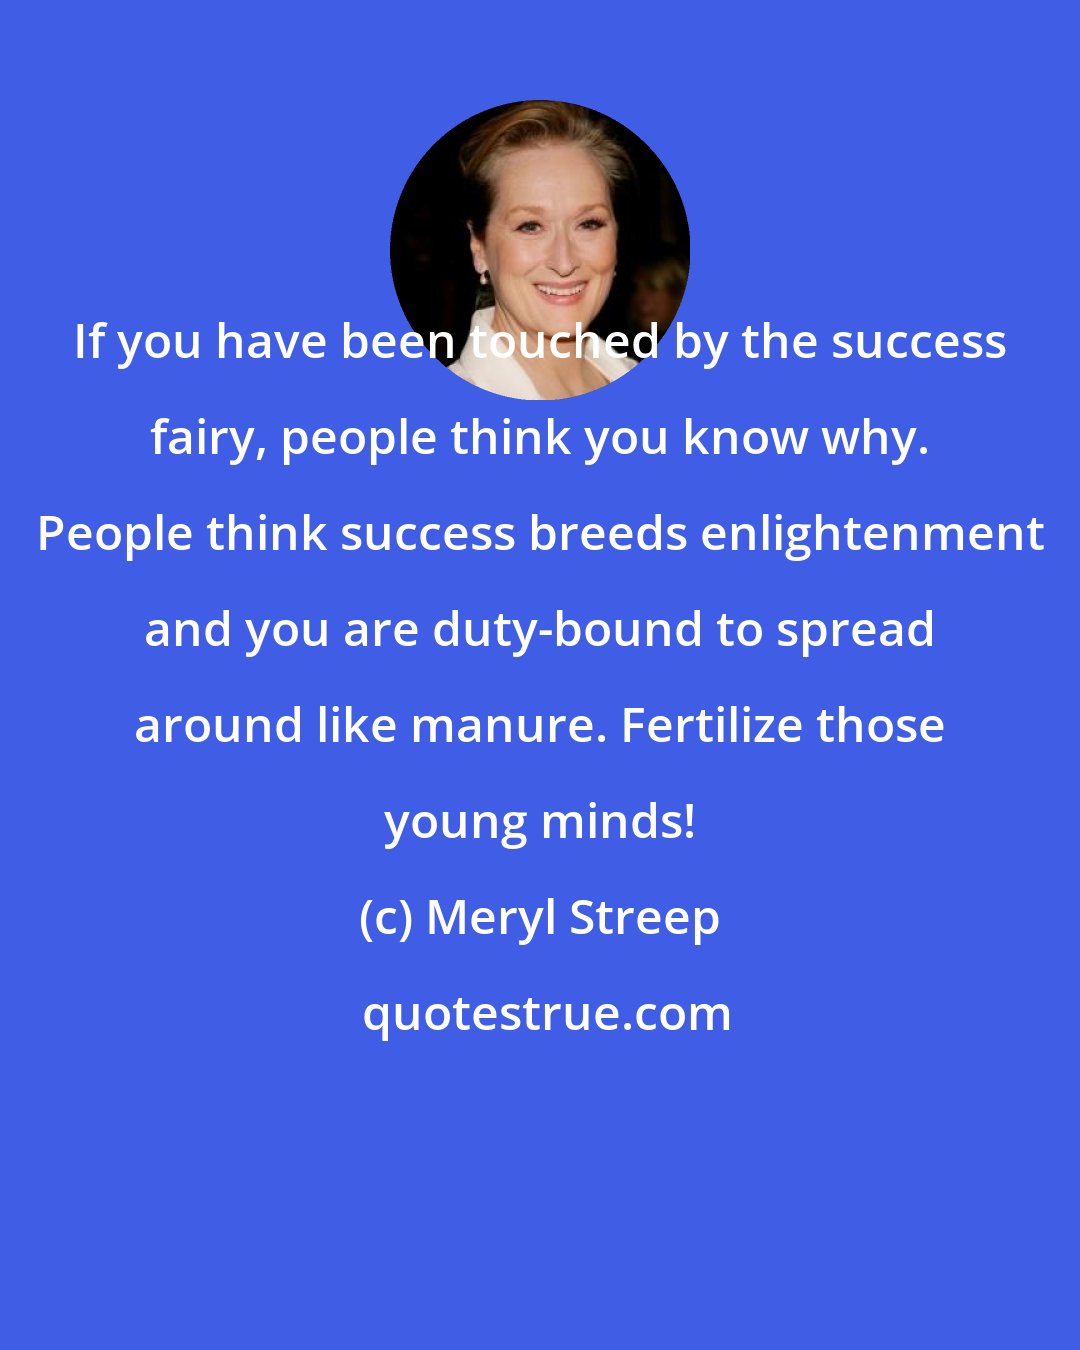 Meryl Streep: If you have been touched by the success fairy, people think you know why. People think success breeds enlightenment and you are duty-bound to spread around like manure. Fertilize those young minds!